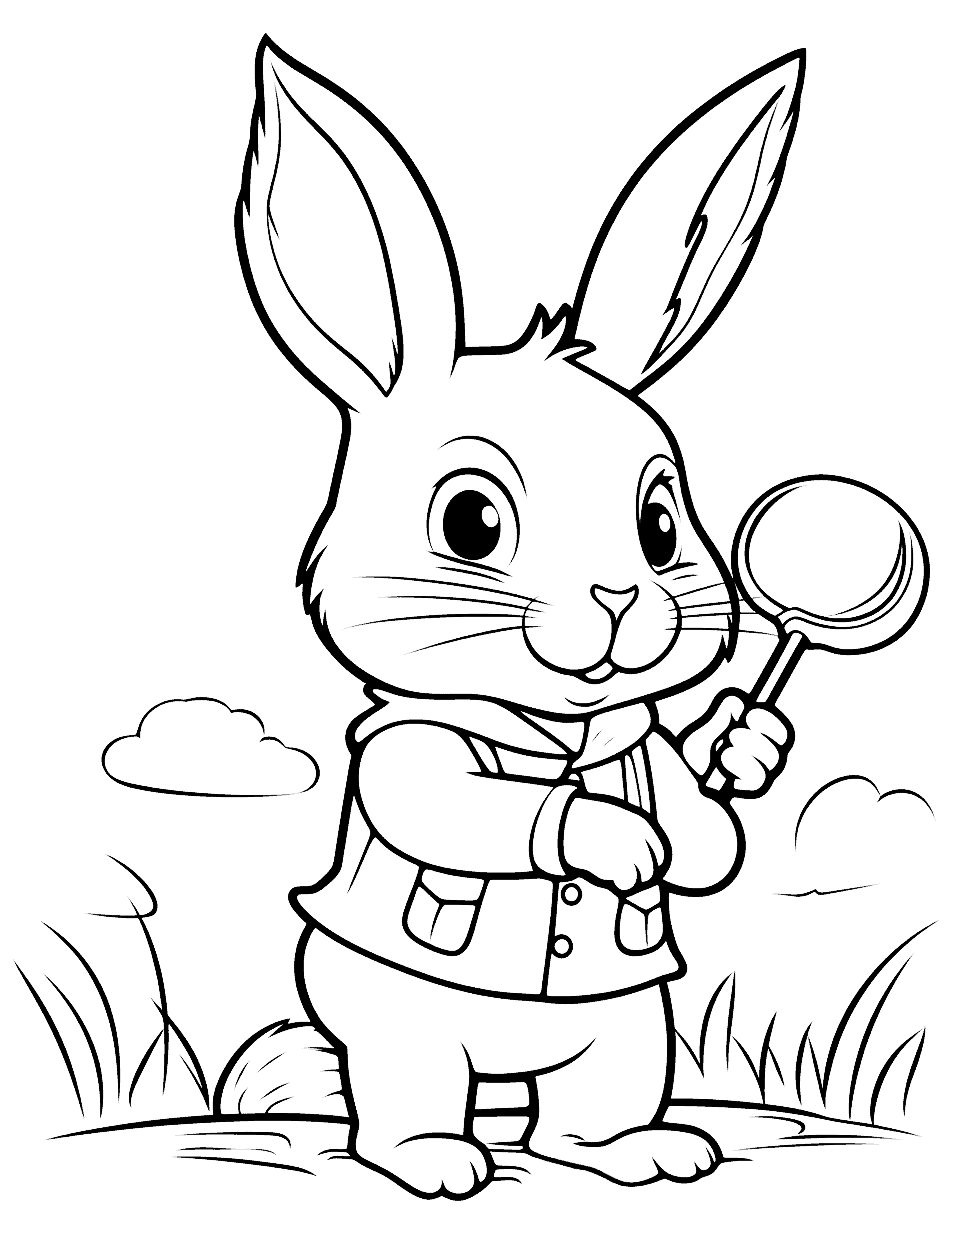 Bunny Detective on the Case Coloring Page - With a magnifying glass in hand, this bunny is on the lookout for clues.